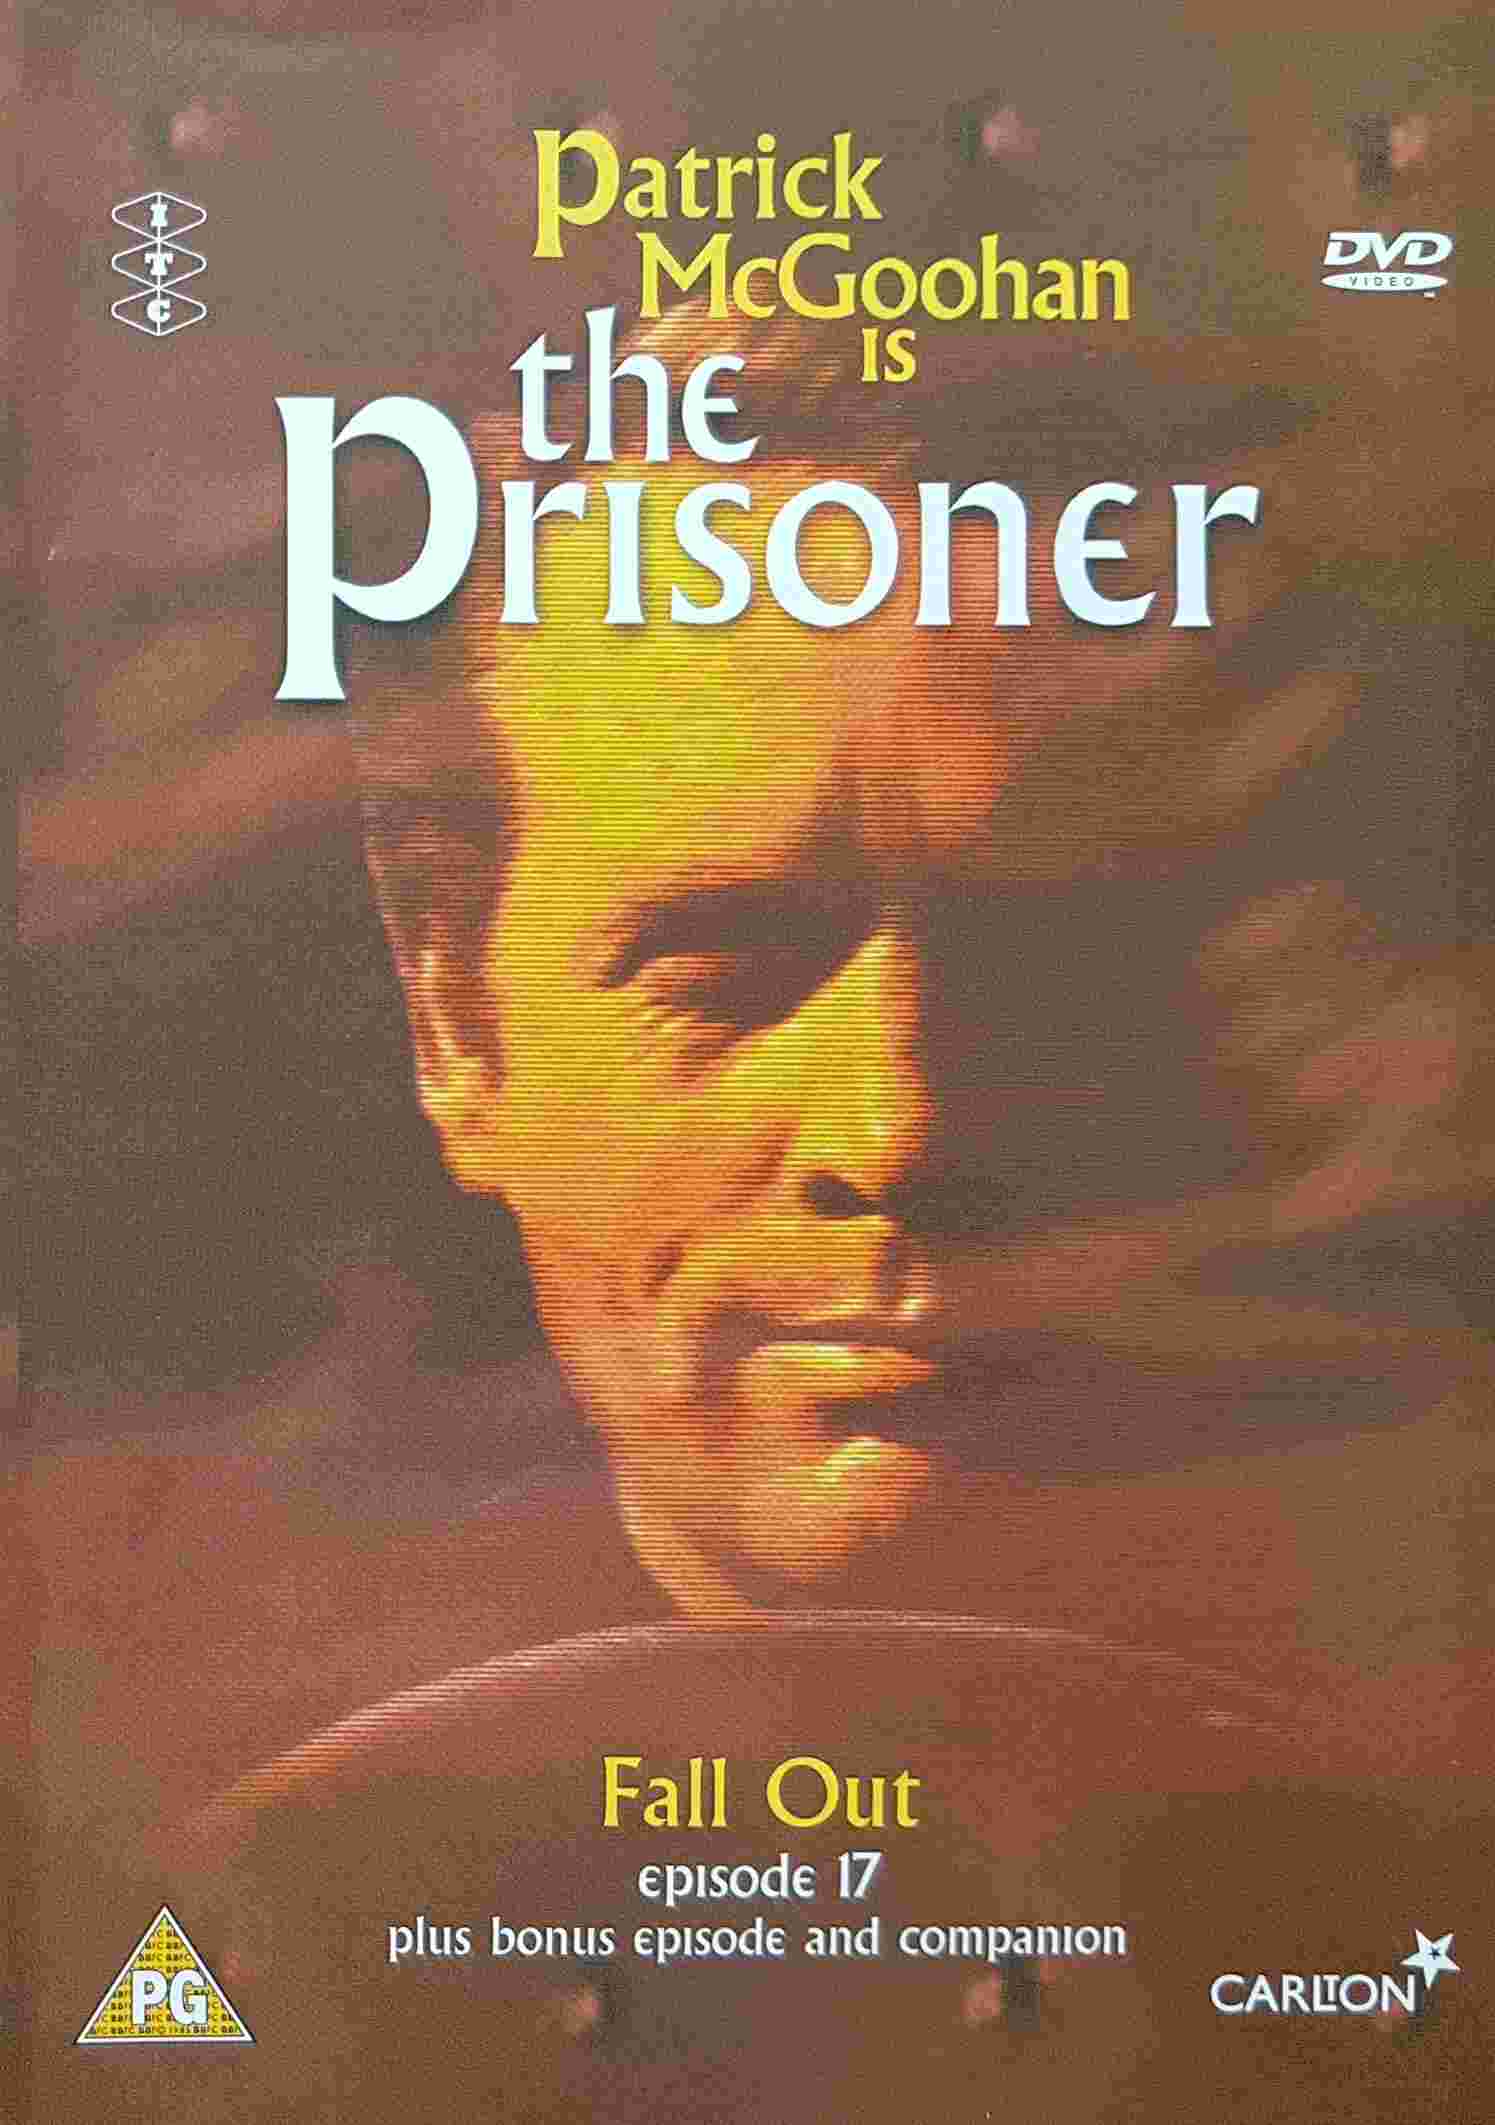 Picture of 37115 01043 The prisoner - Episode 17, Alternative chimes, Prisoner companion by artist Various from ITV, Channel 4 and Channel 5 dvds library